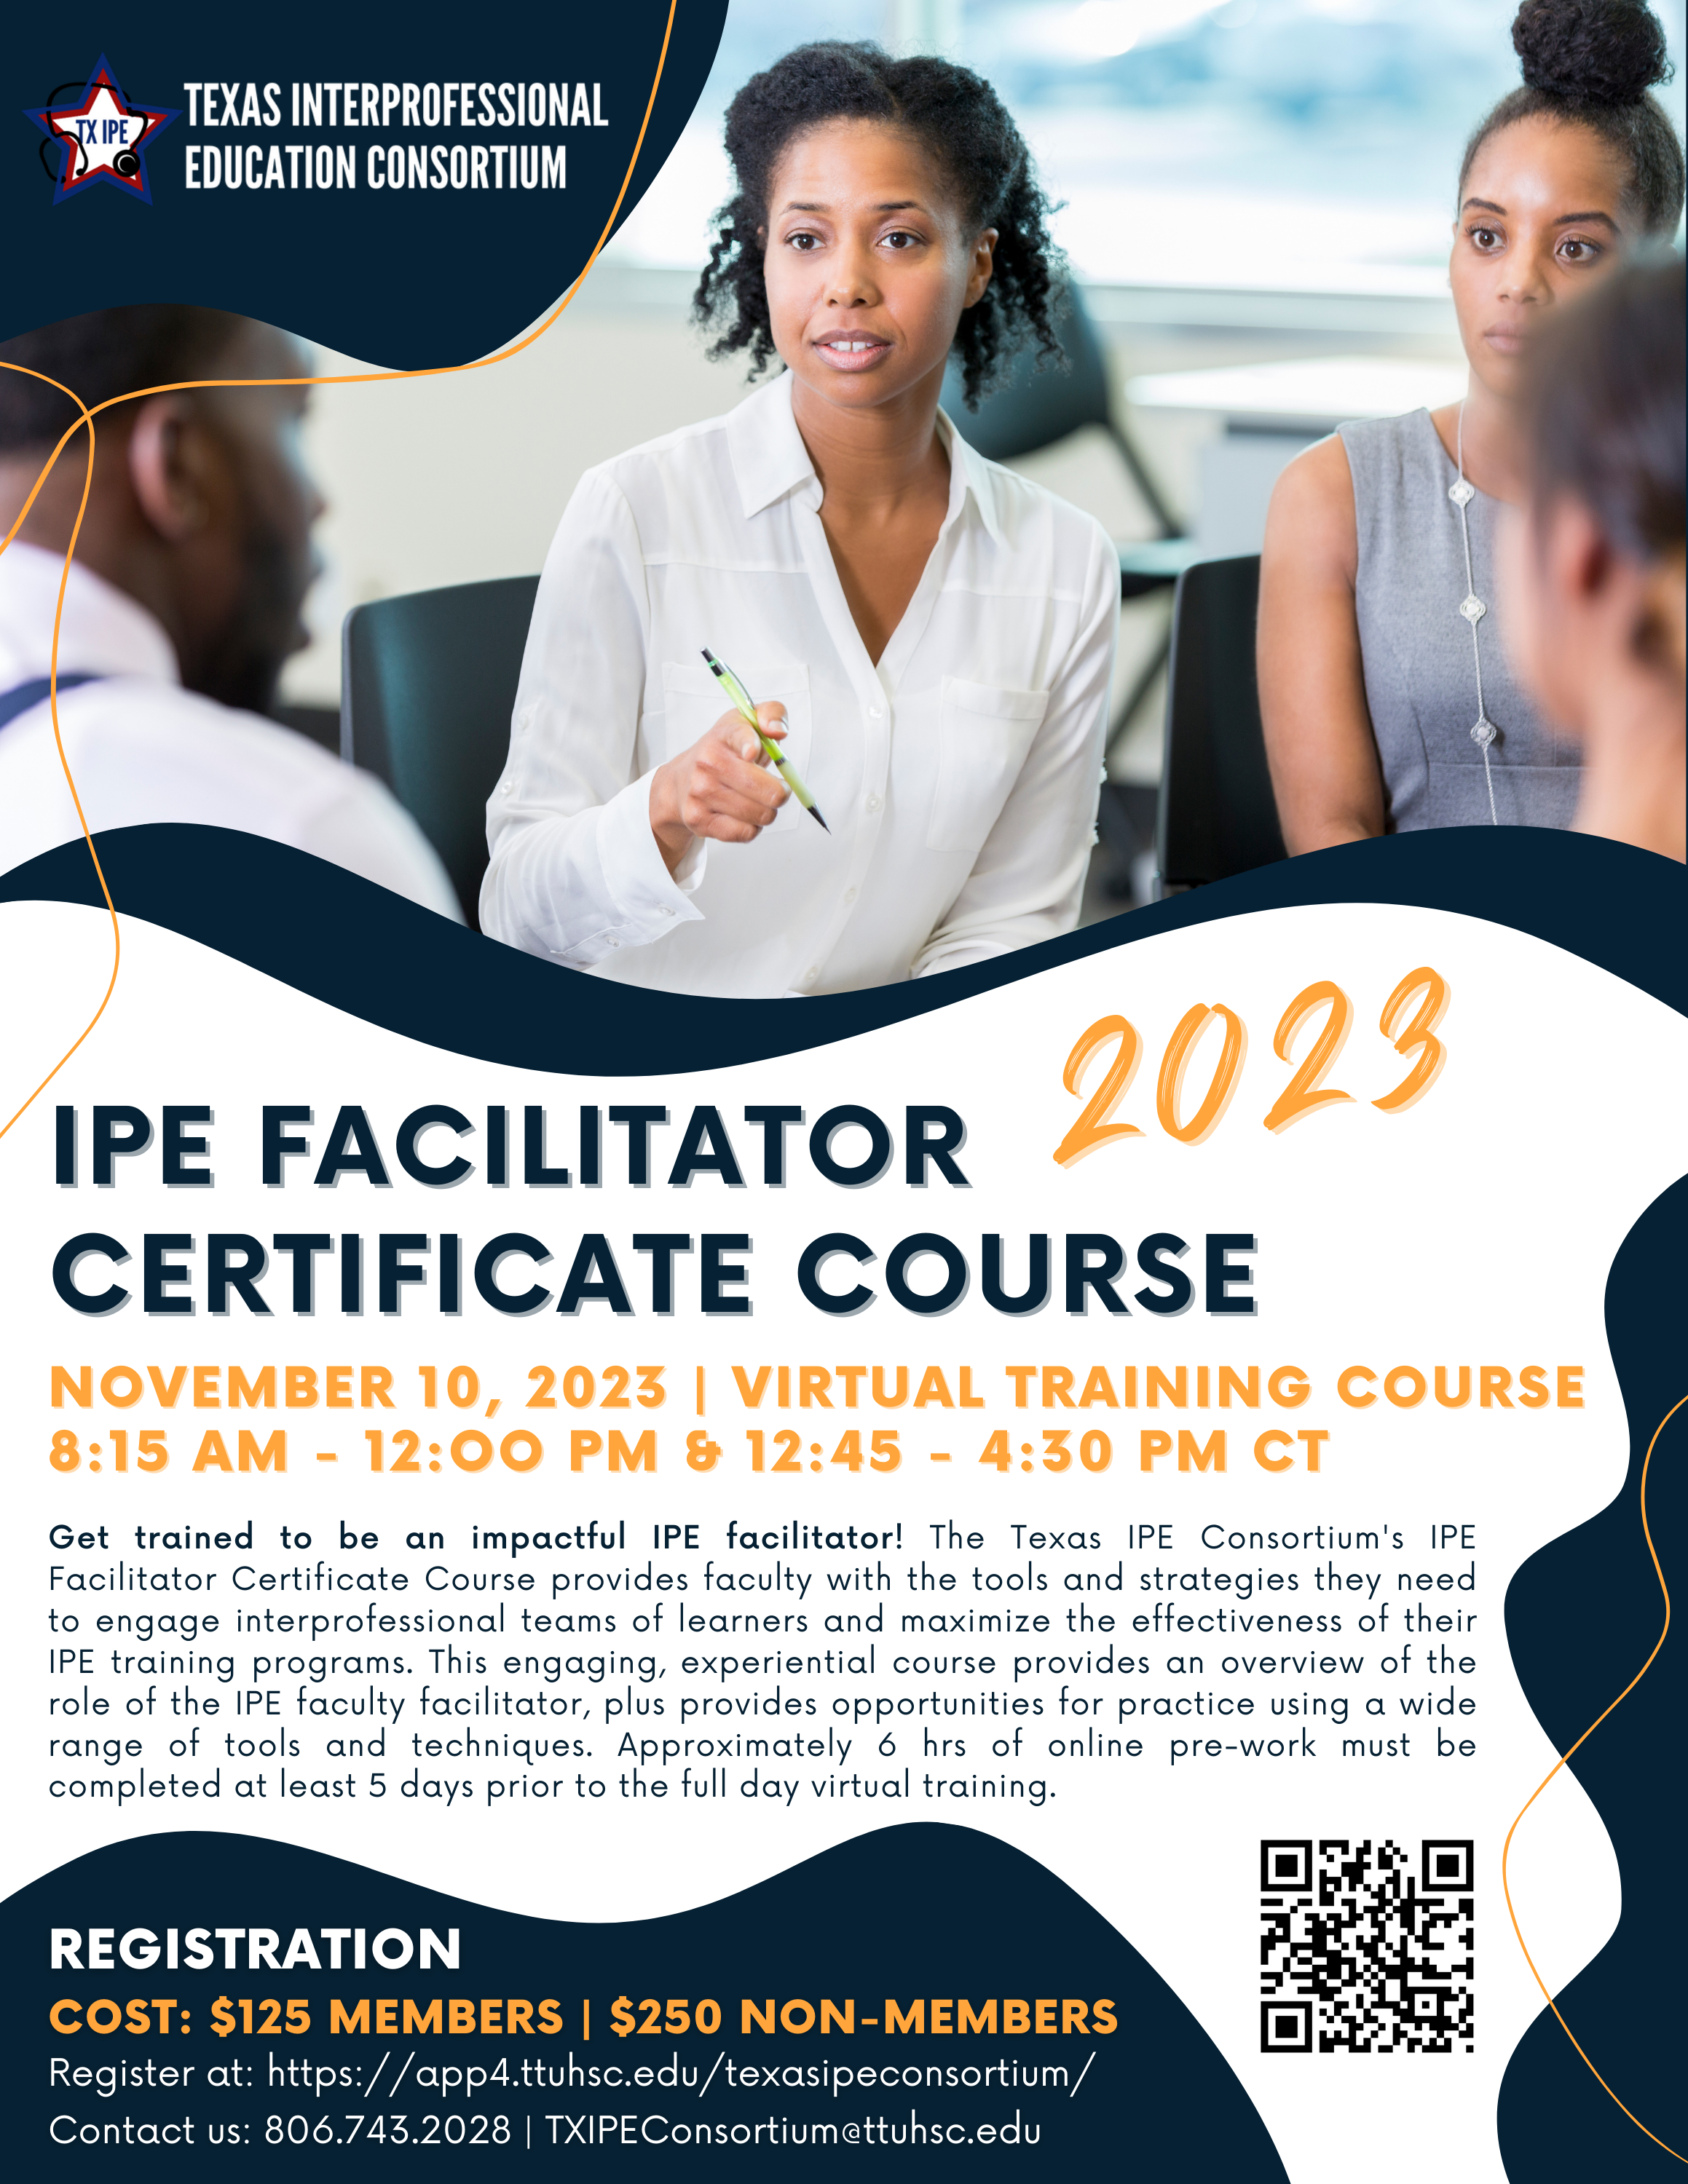 IPE Facilitator Certification Course November 10, 2023 from 8:15 am to 4:30 pm CT